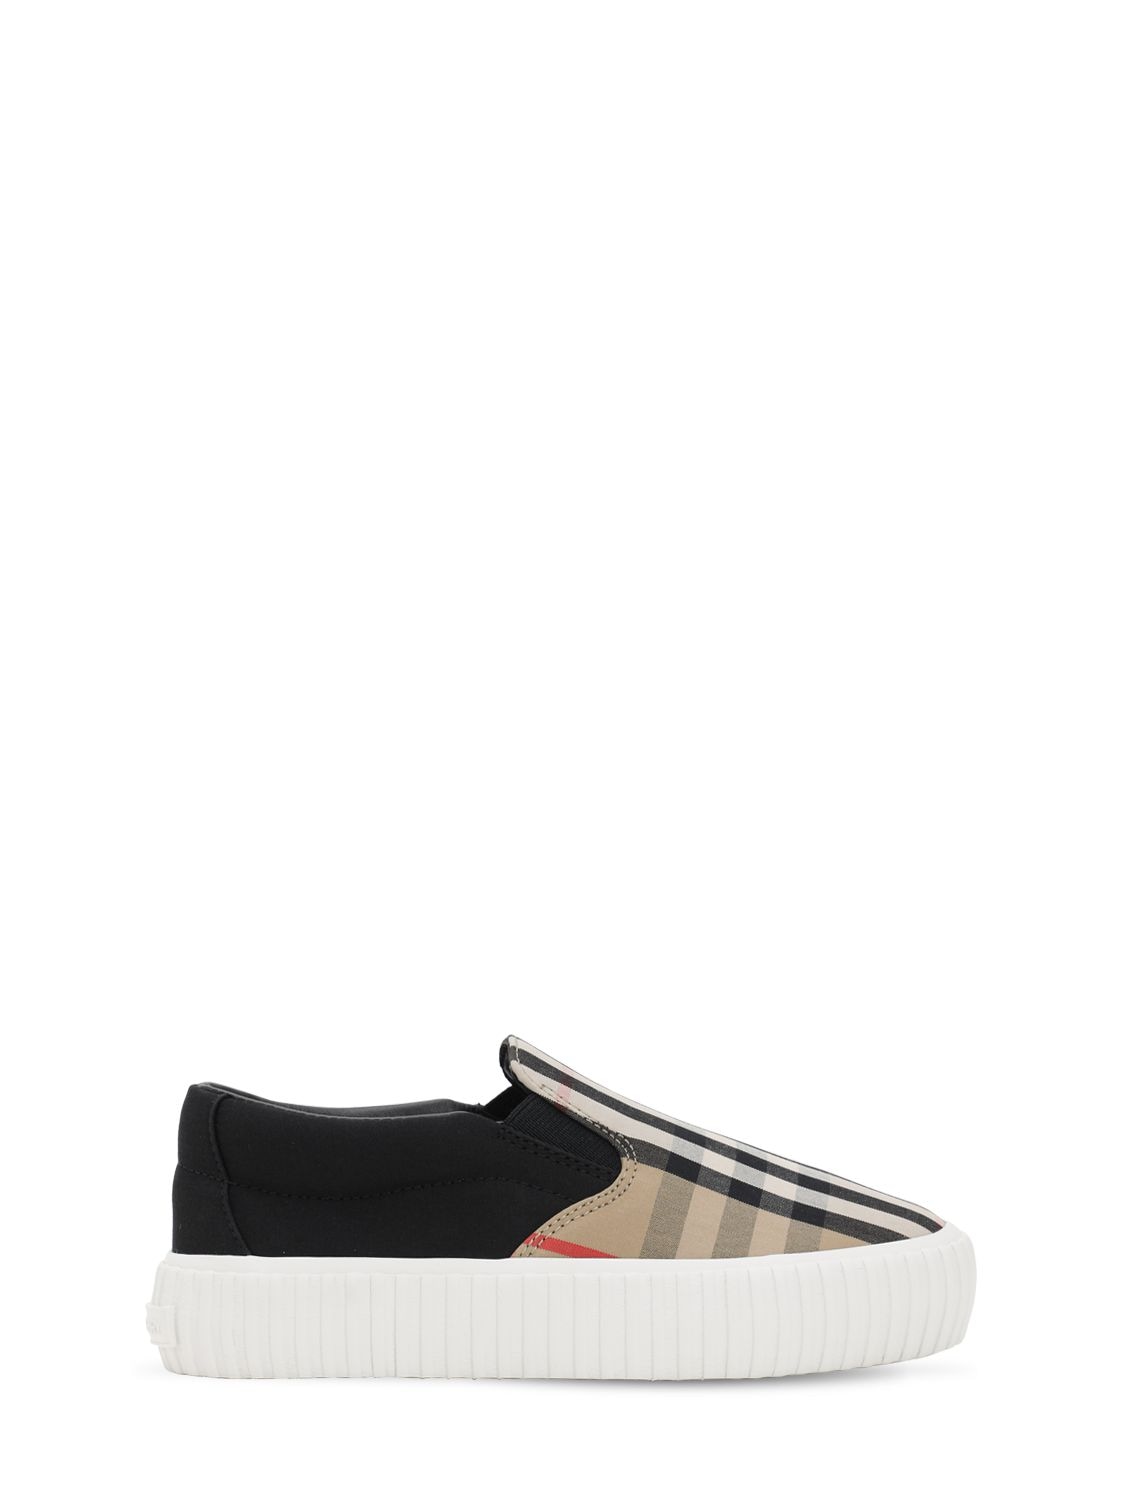 Burberry Kids' Check Cotton Canvas Slip-on Sneakers In 베이지,블랙